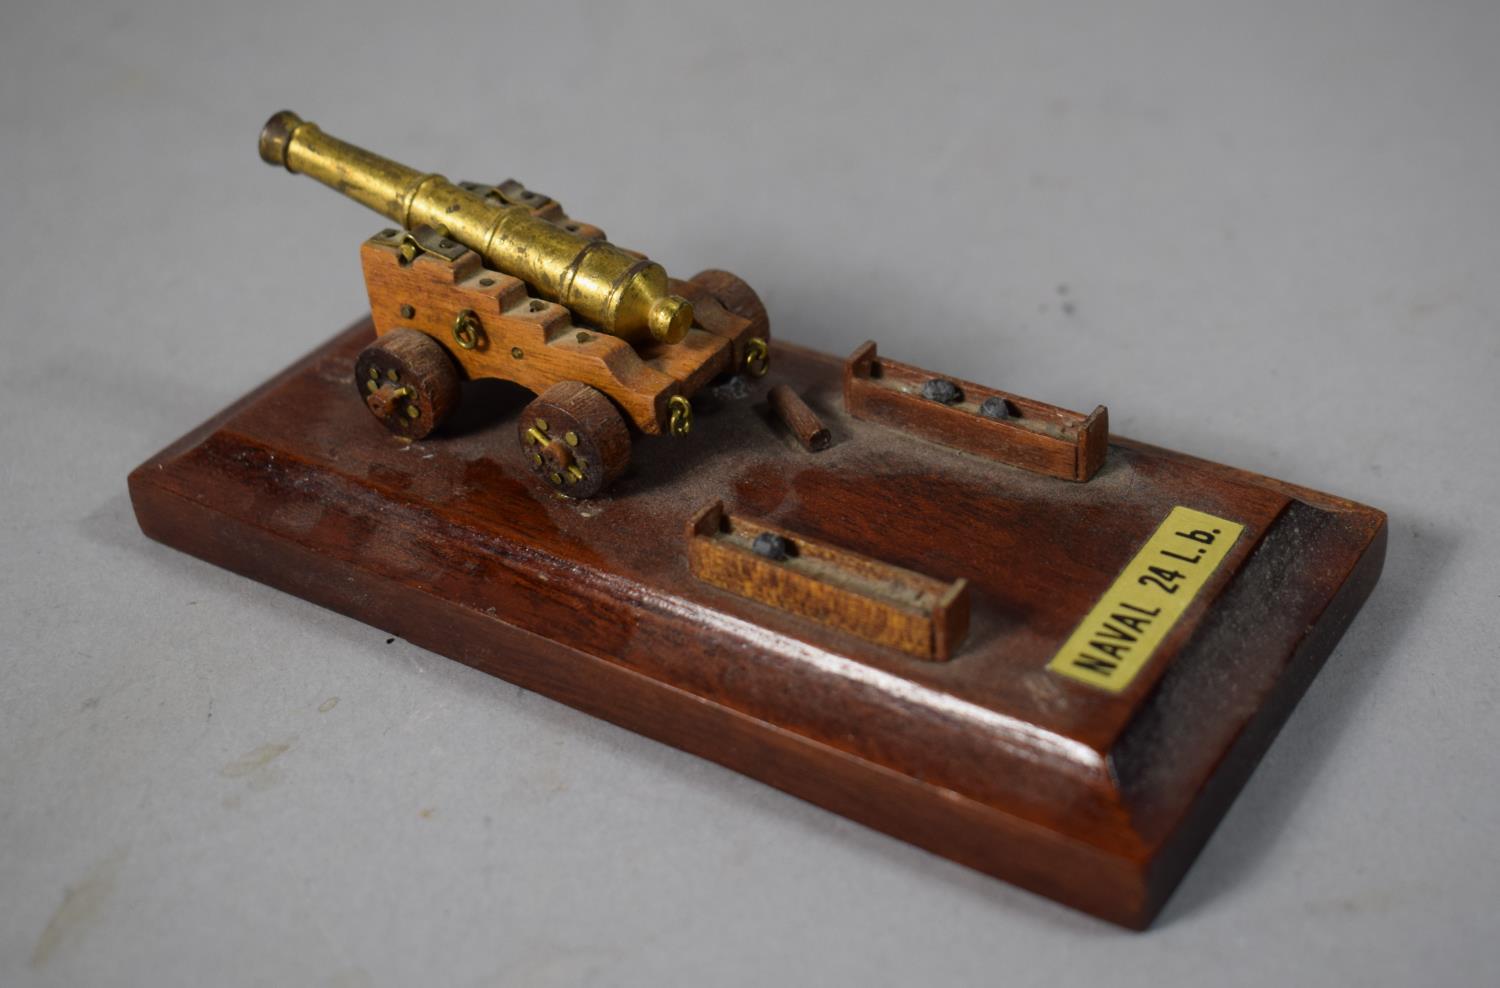 A Small Military Ink Bottle Stand Depicting Naval 24lb Cannon, Missing Ink Bottle, 13cm Long